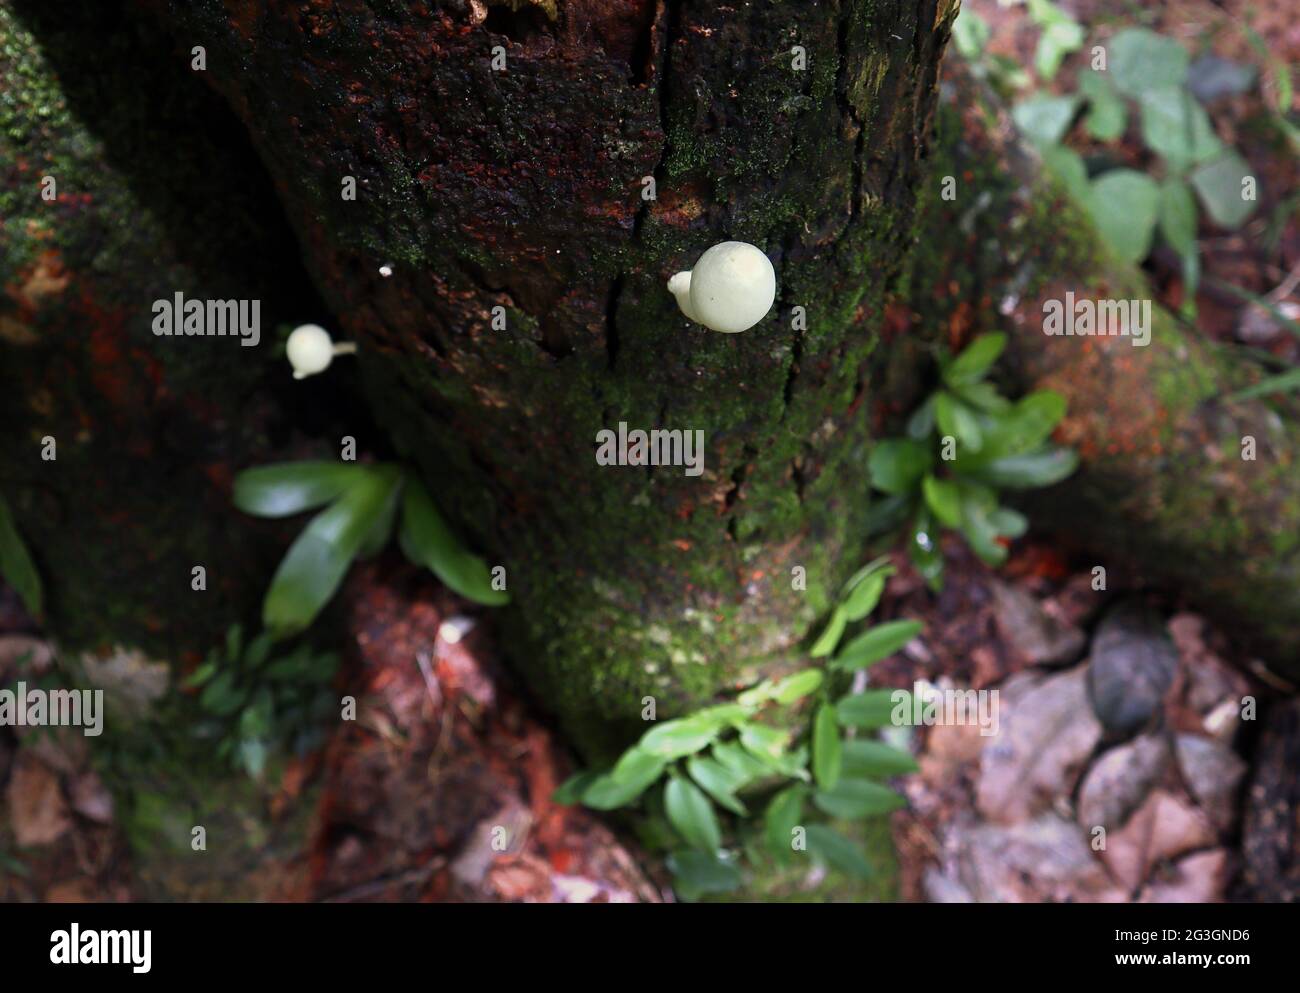 Overhead view of a white mushroom on a trunk surface of a jack fruit tree Stock Photo